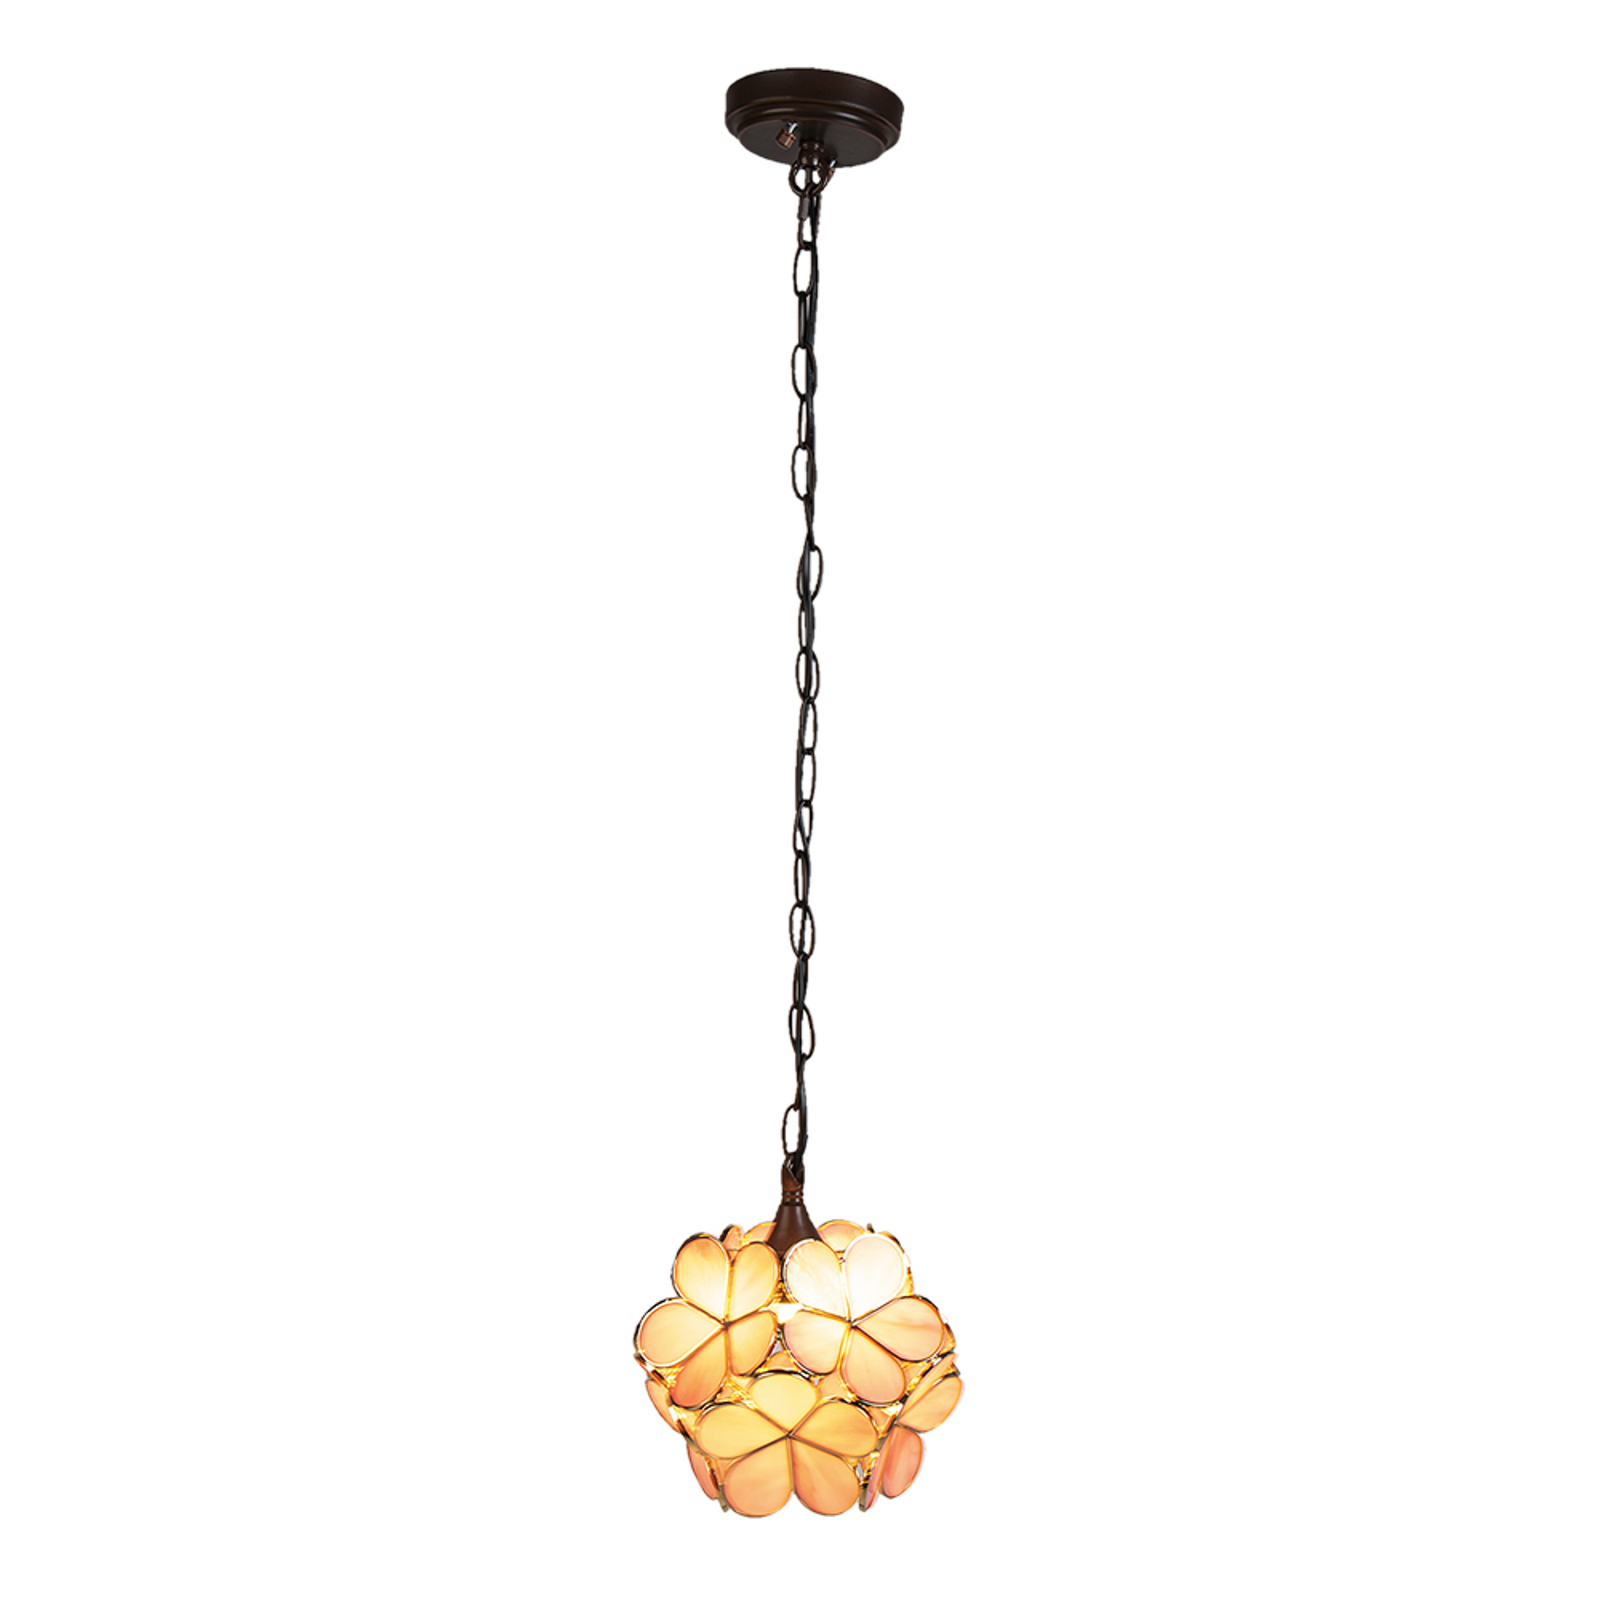 5LL-6093 hanging light in a Tiffany style, pink